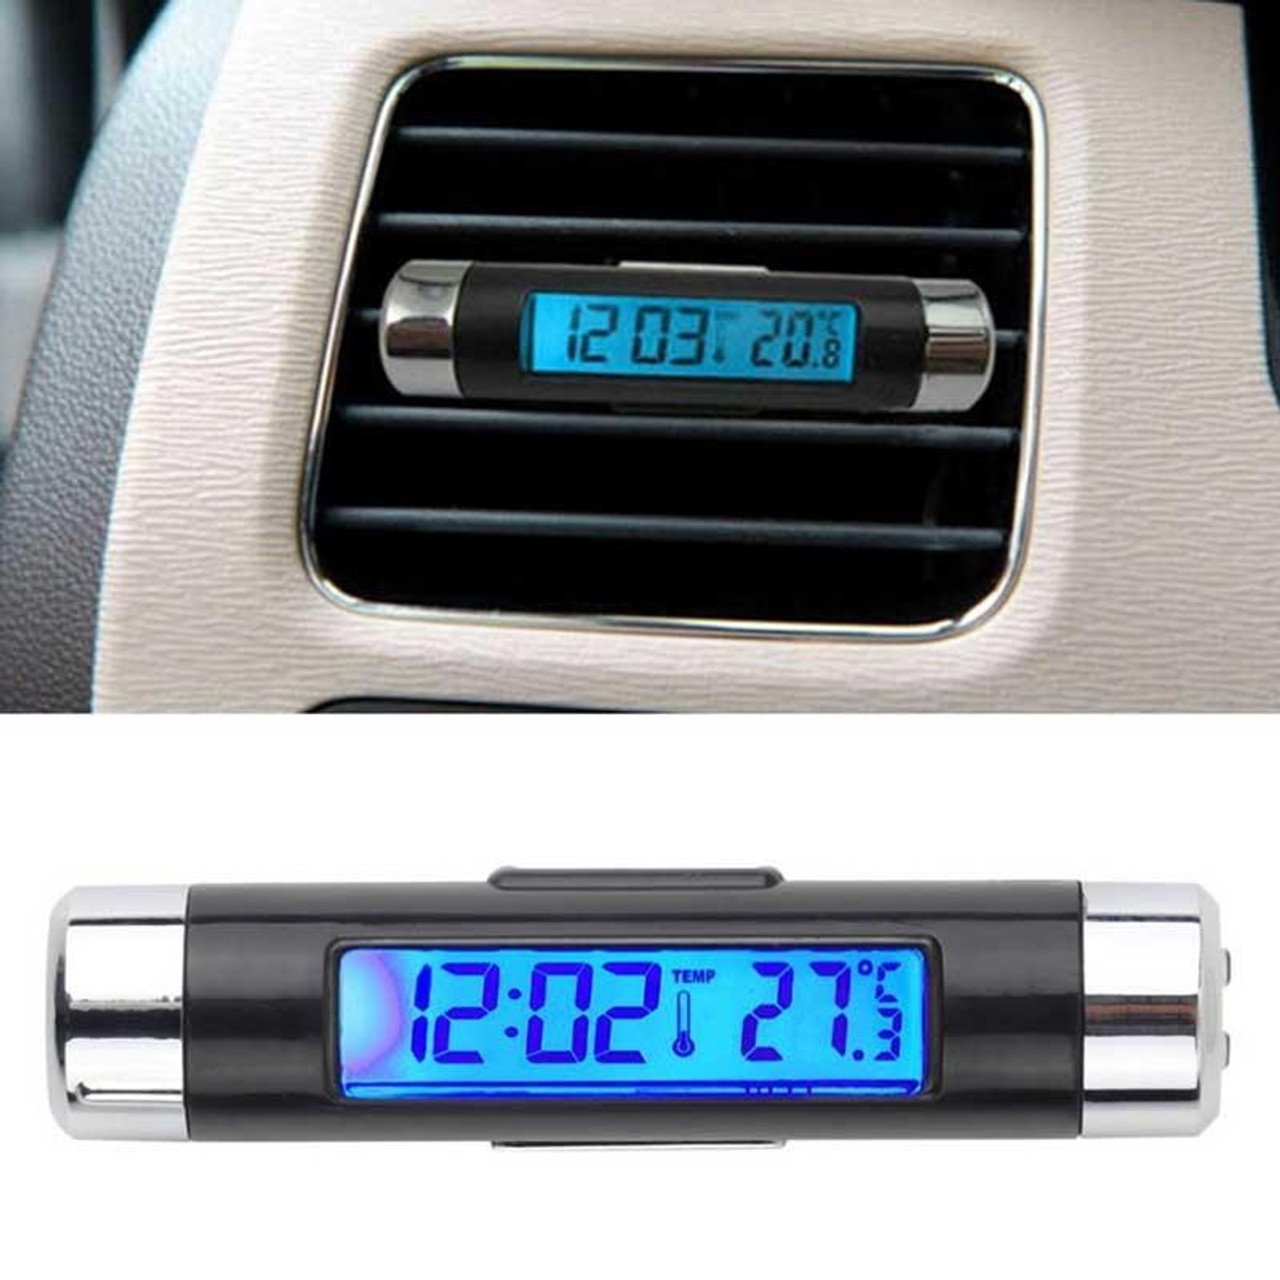 2 in 1 Car Auto Thermometer Clock Calendar LCD Display Screen, snatcher